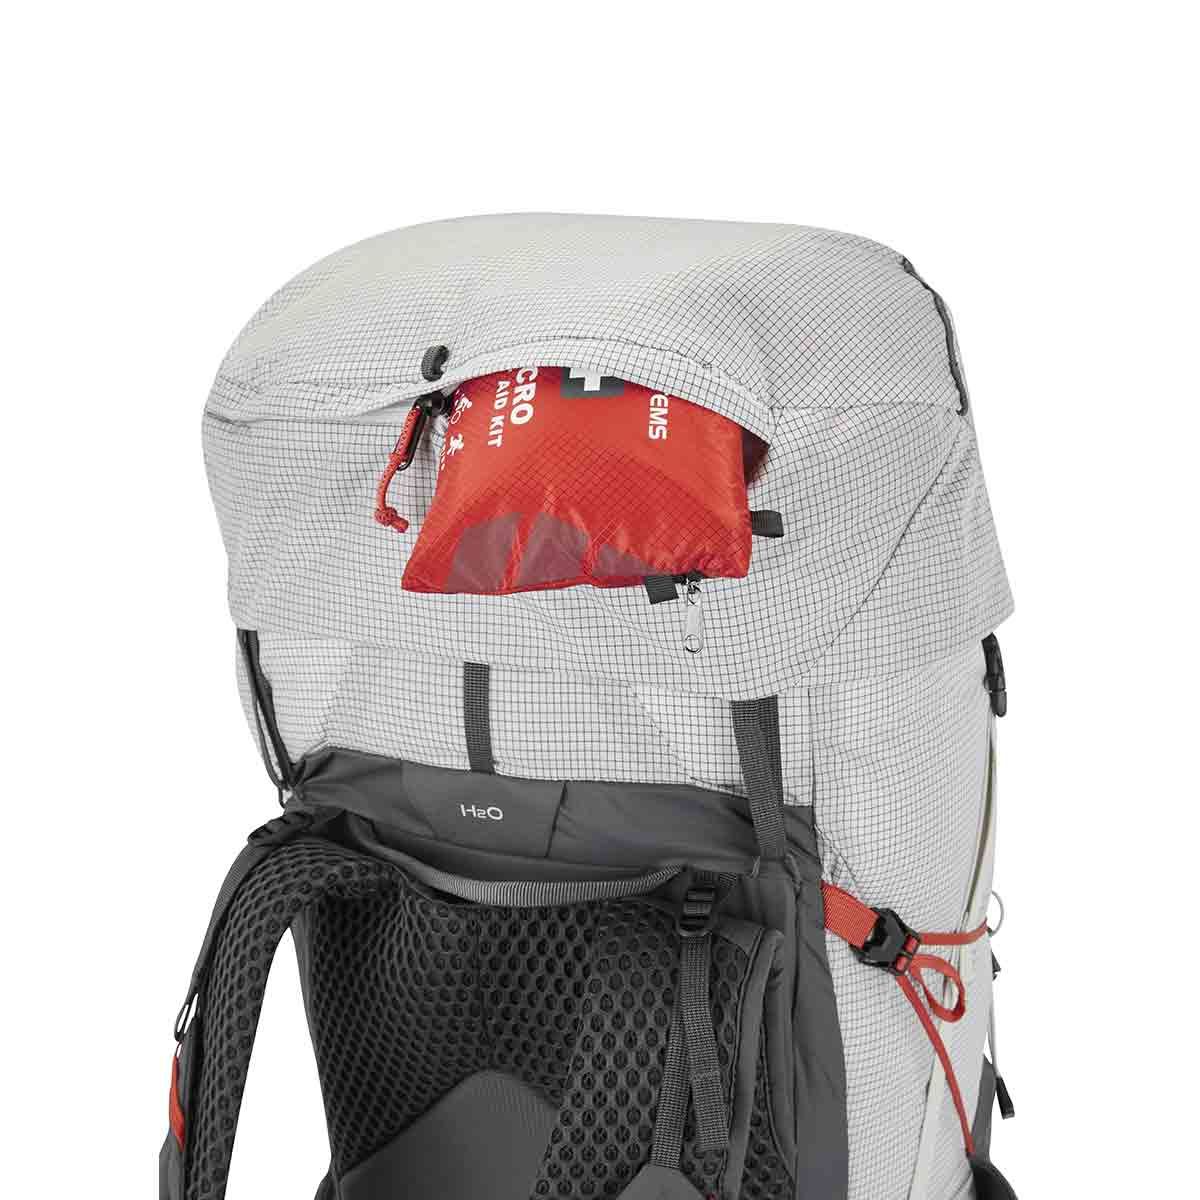 Rab Muon 50 backpacking backpack - Men